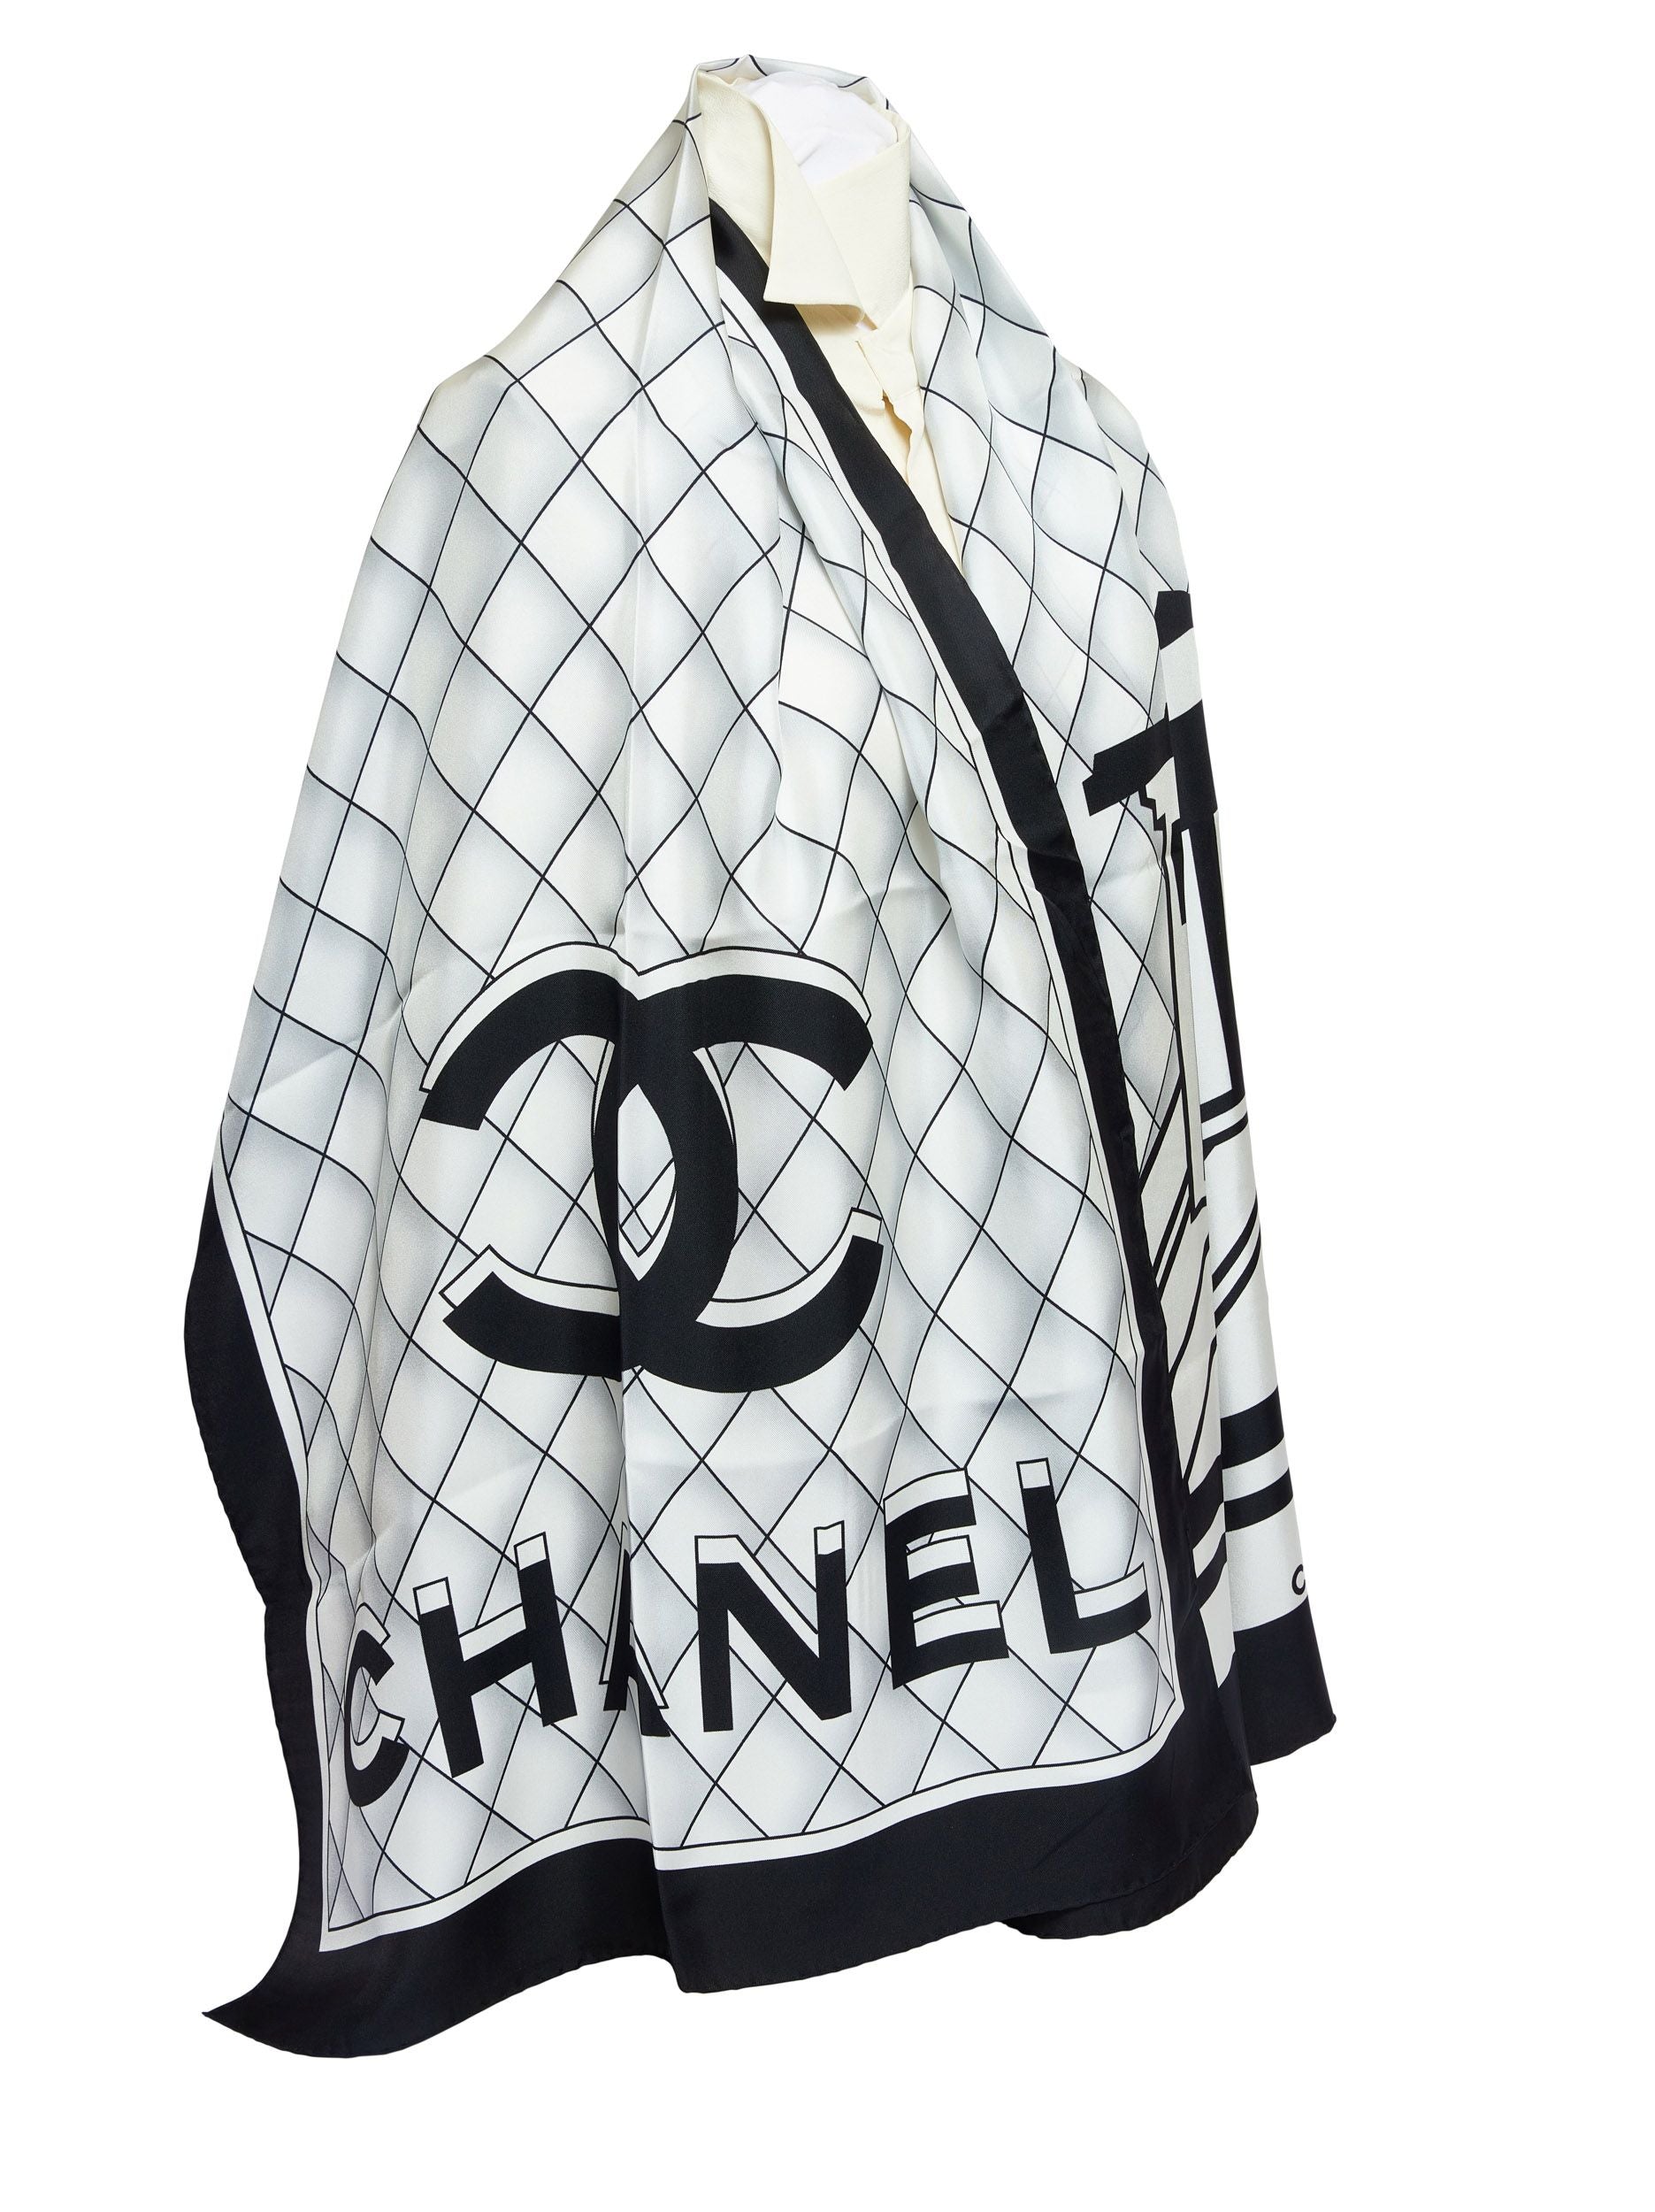 Chanel Black And White Silk Scarf - Vintage Lux